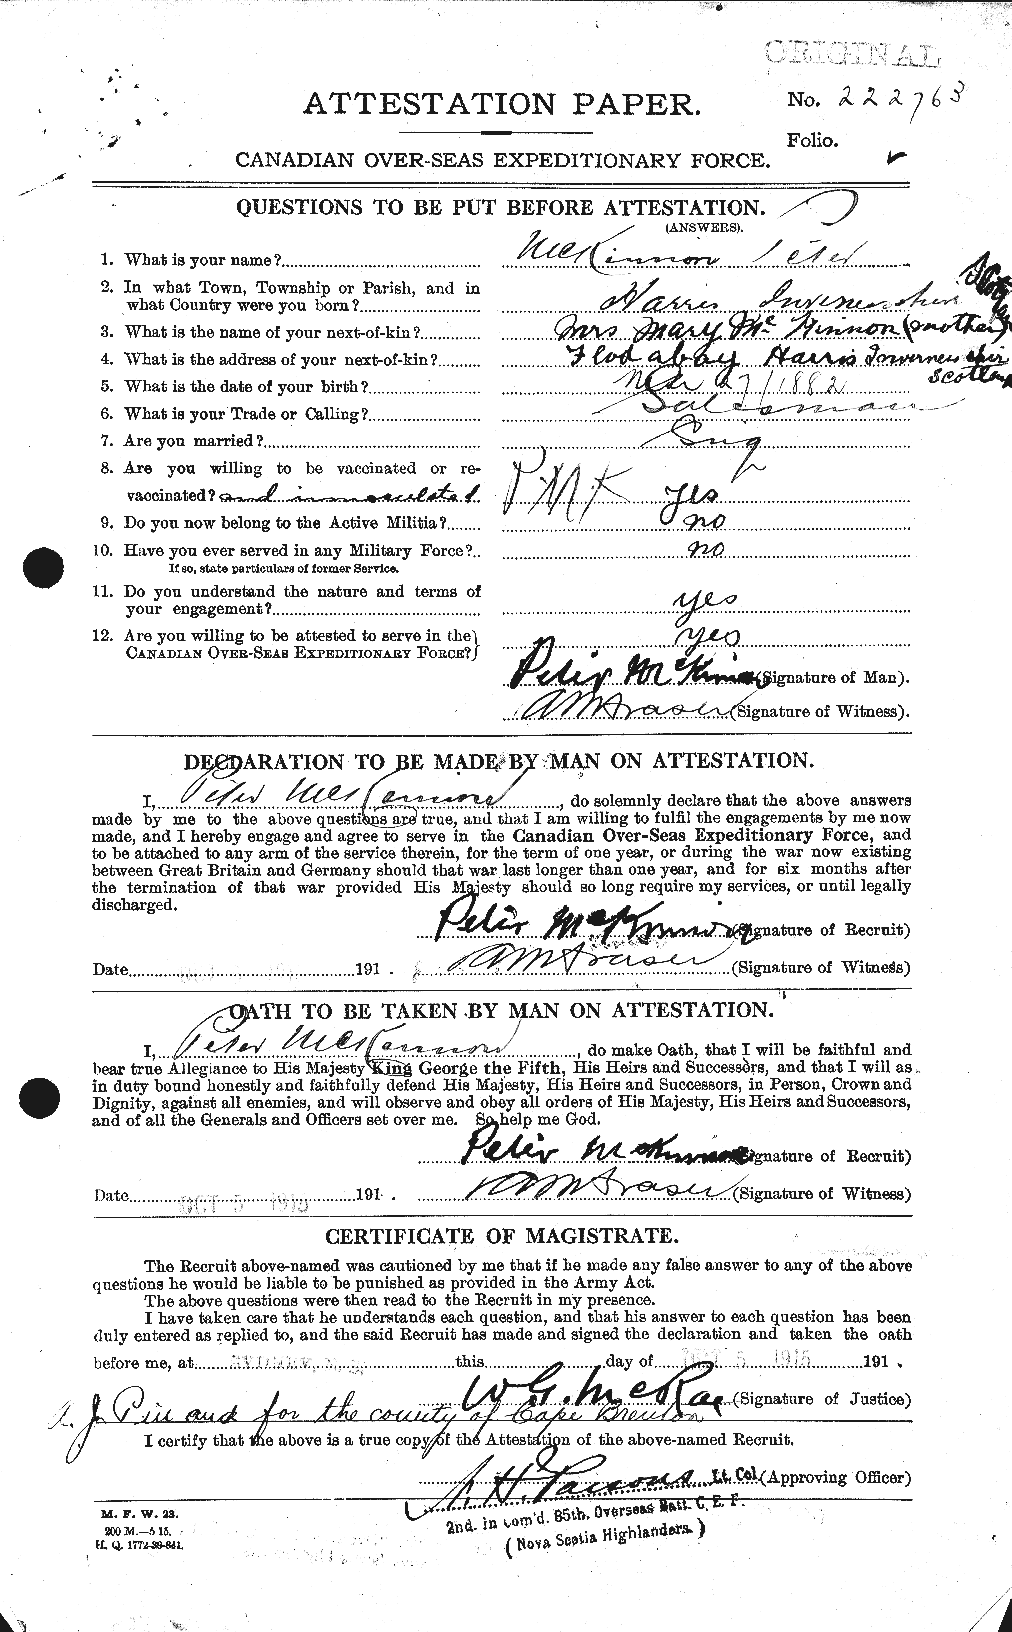 Personnel Records of the First World War - CEF 534227a